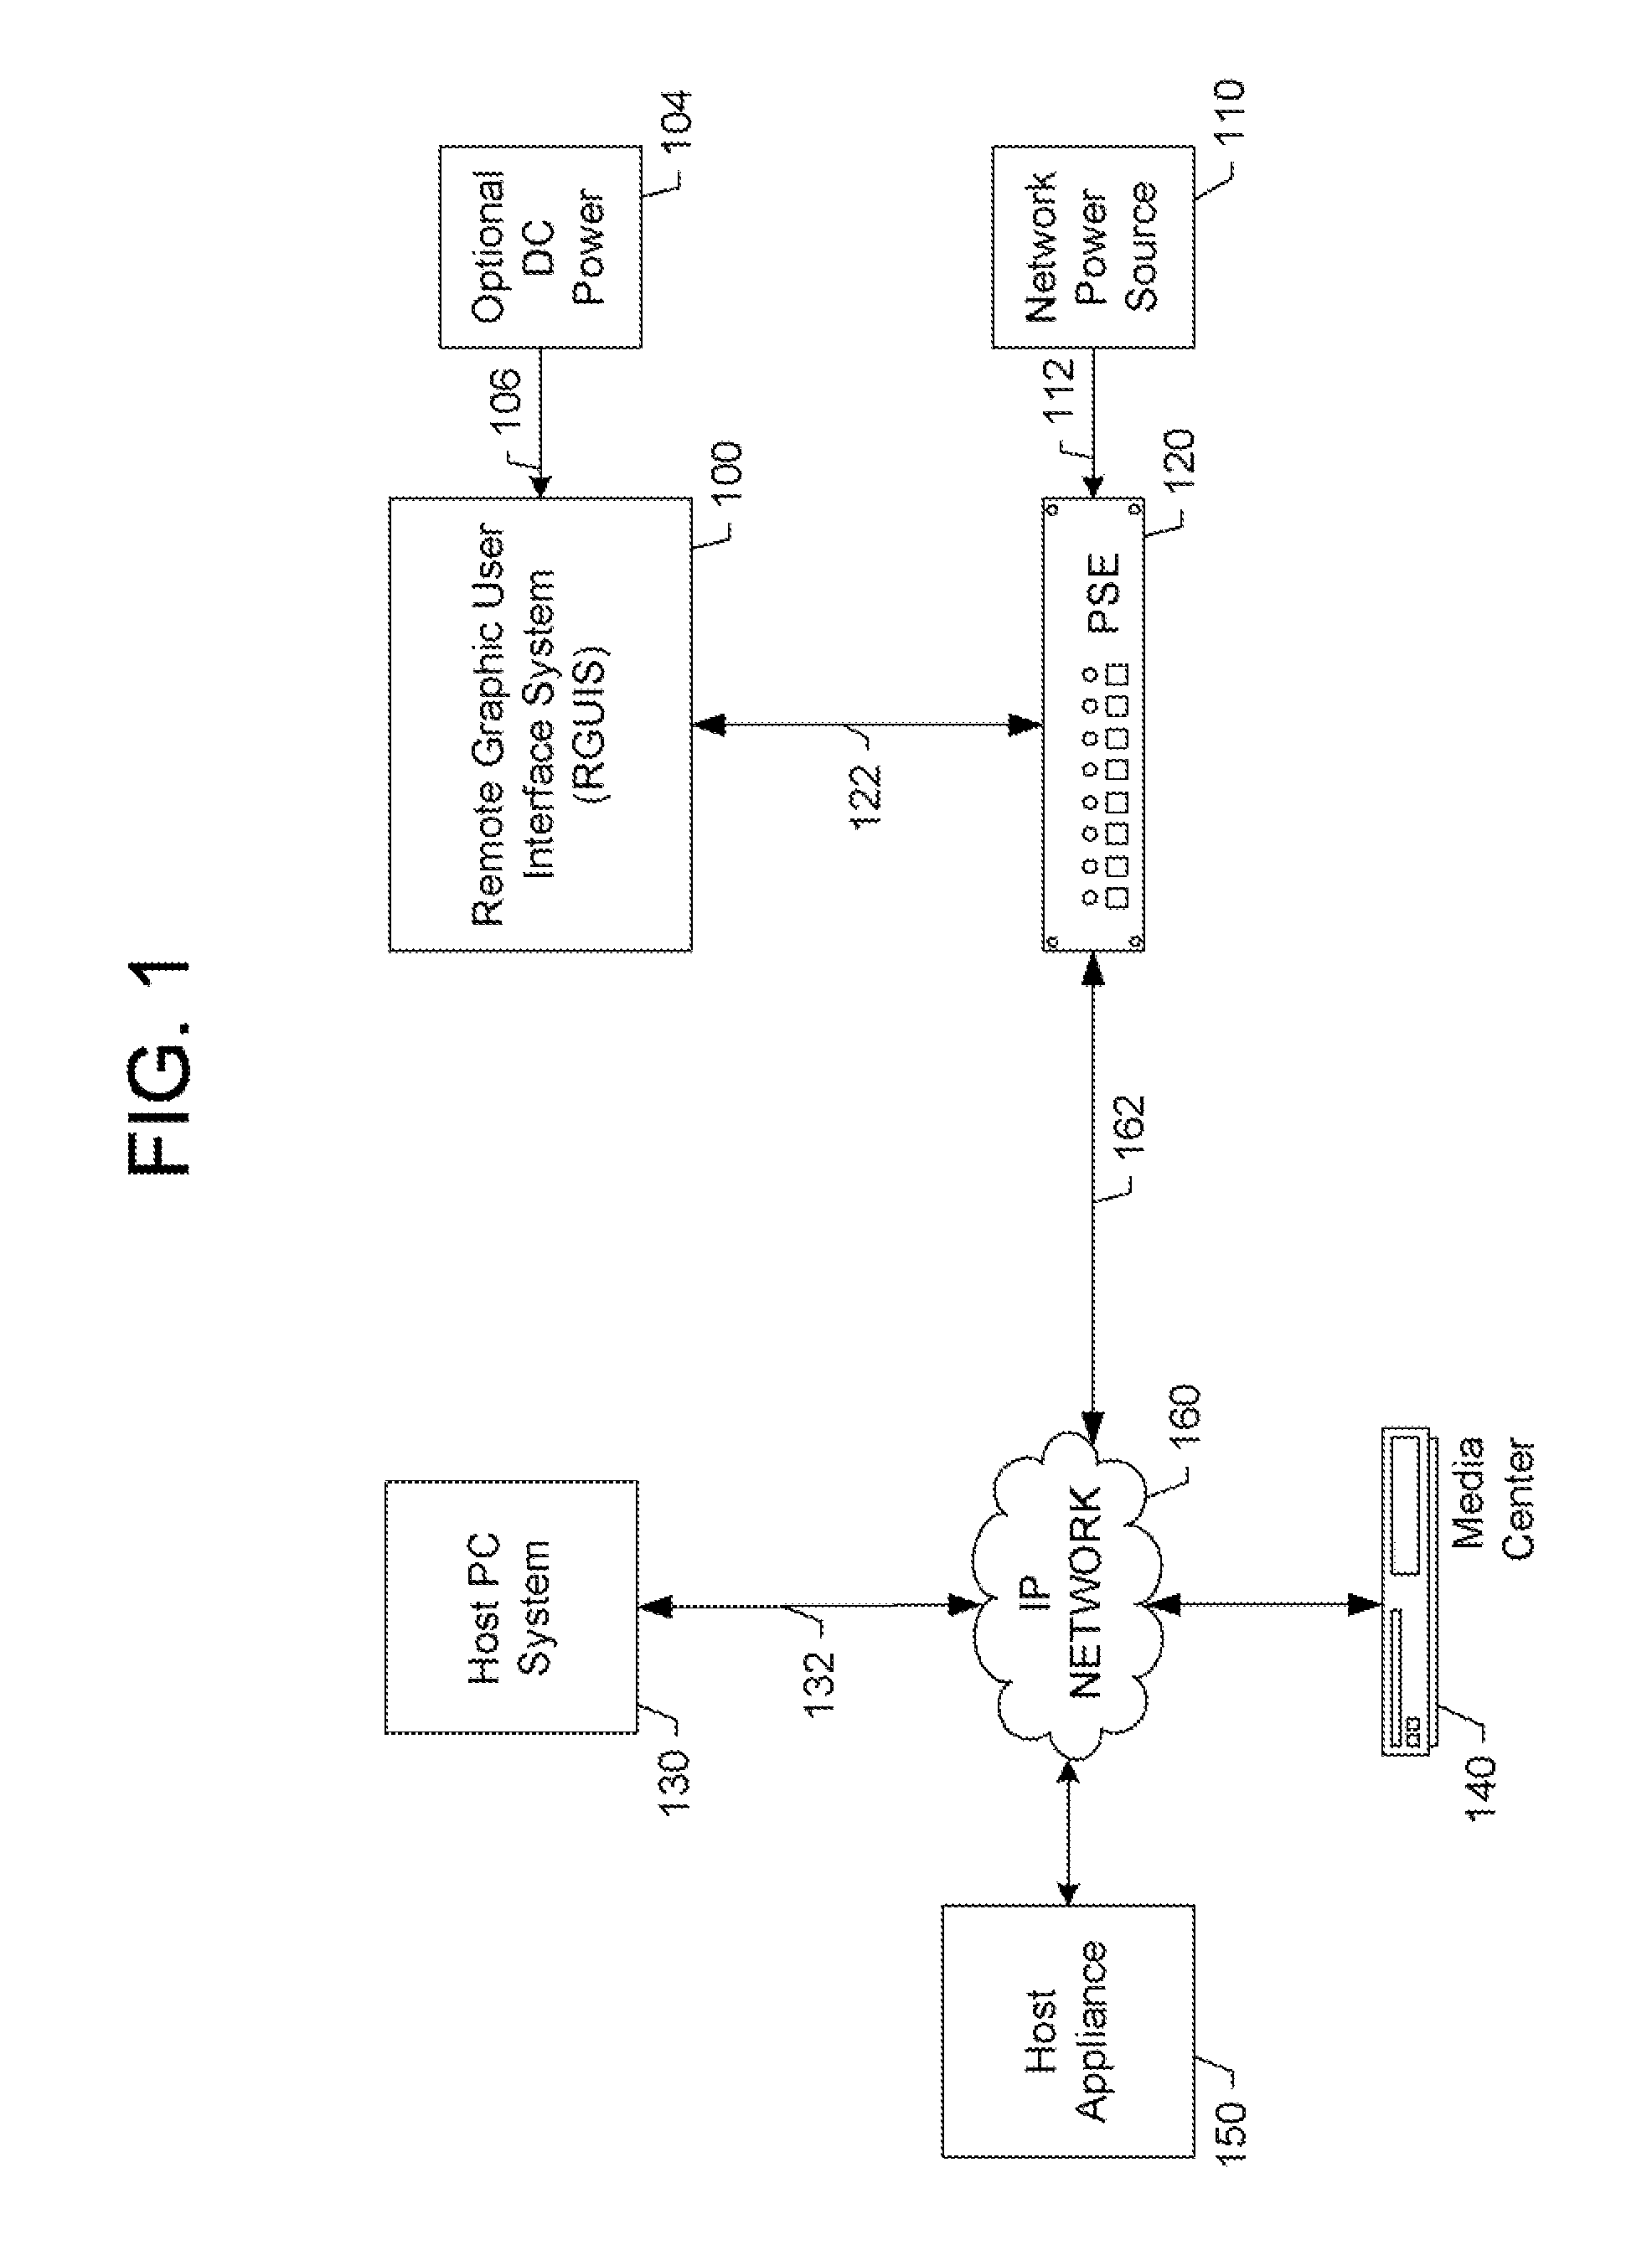 Methods and apparatus for managing a user interface on a powered network